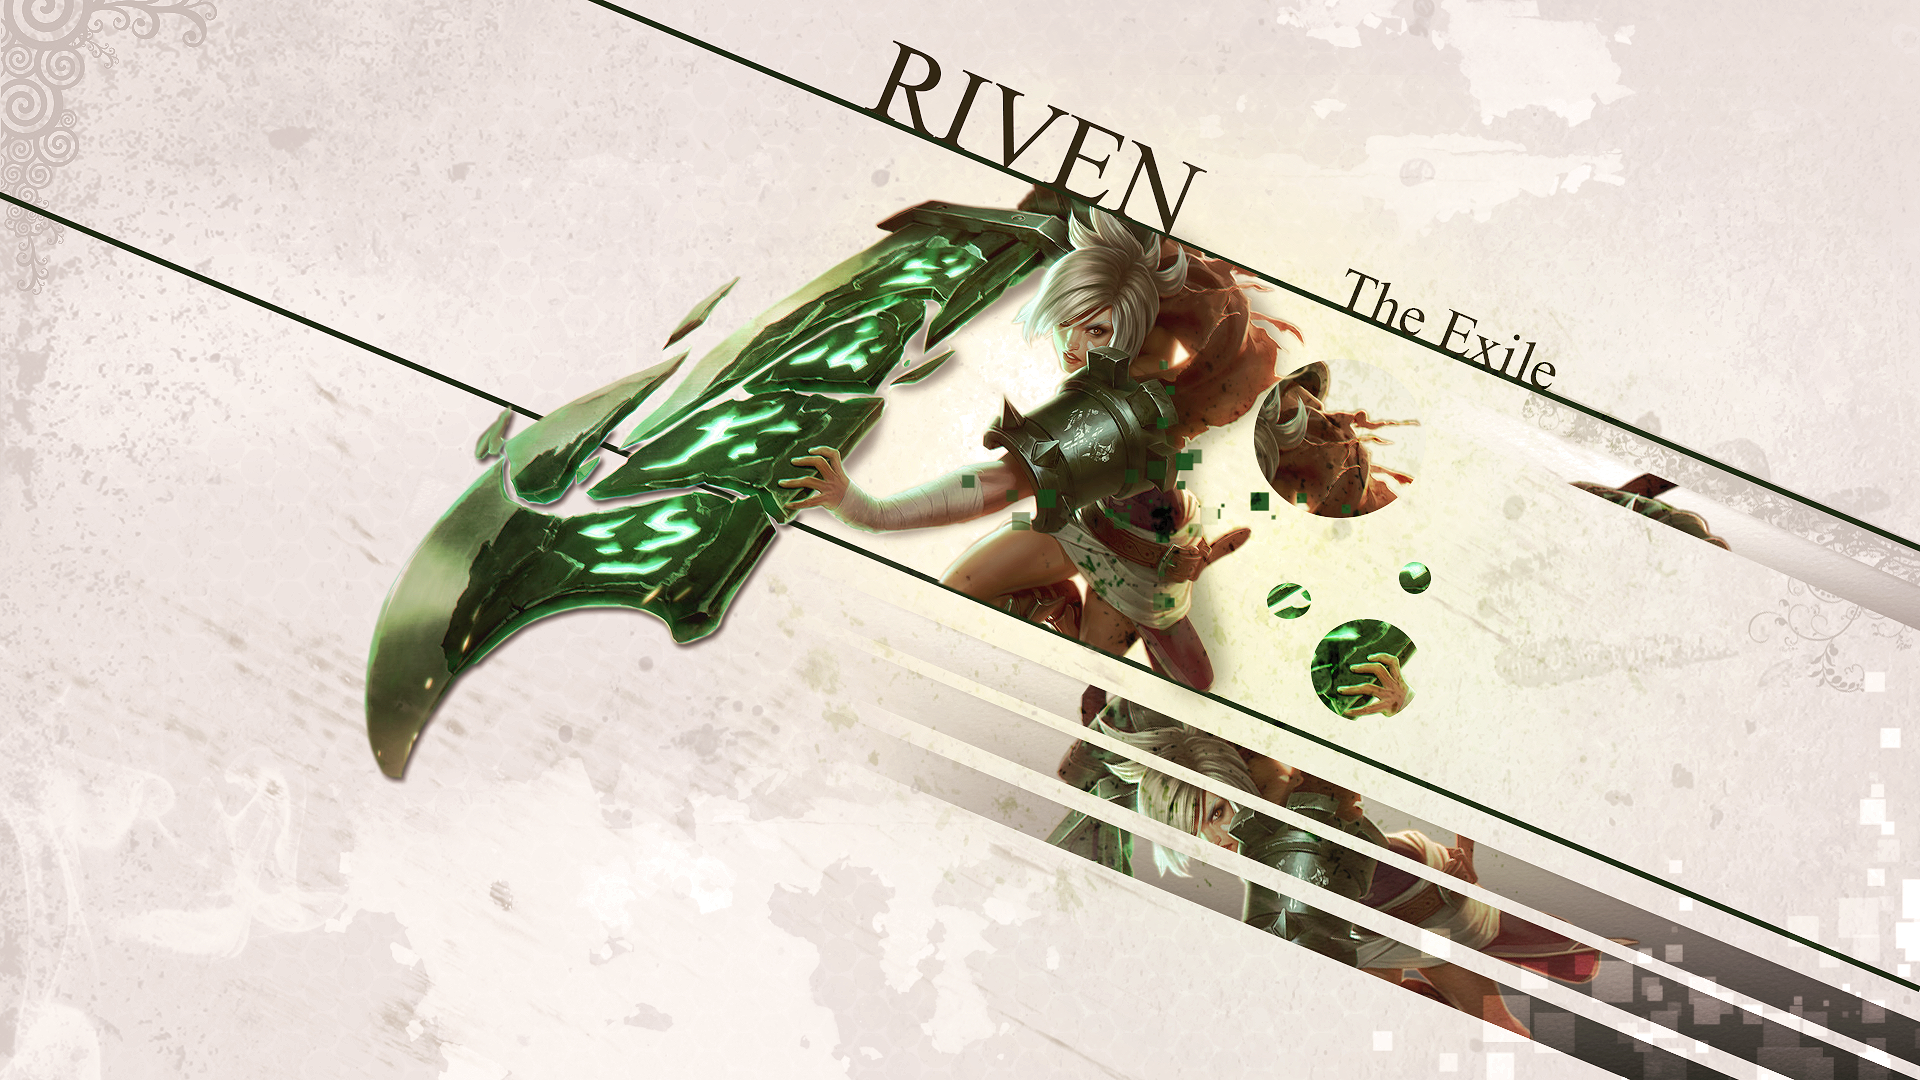 Riven The Exile by Freyfie